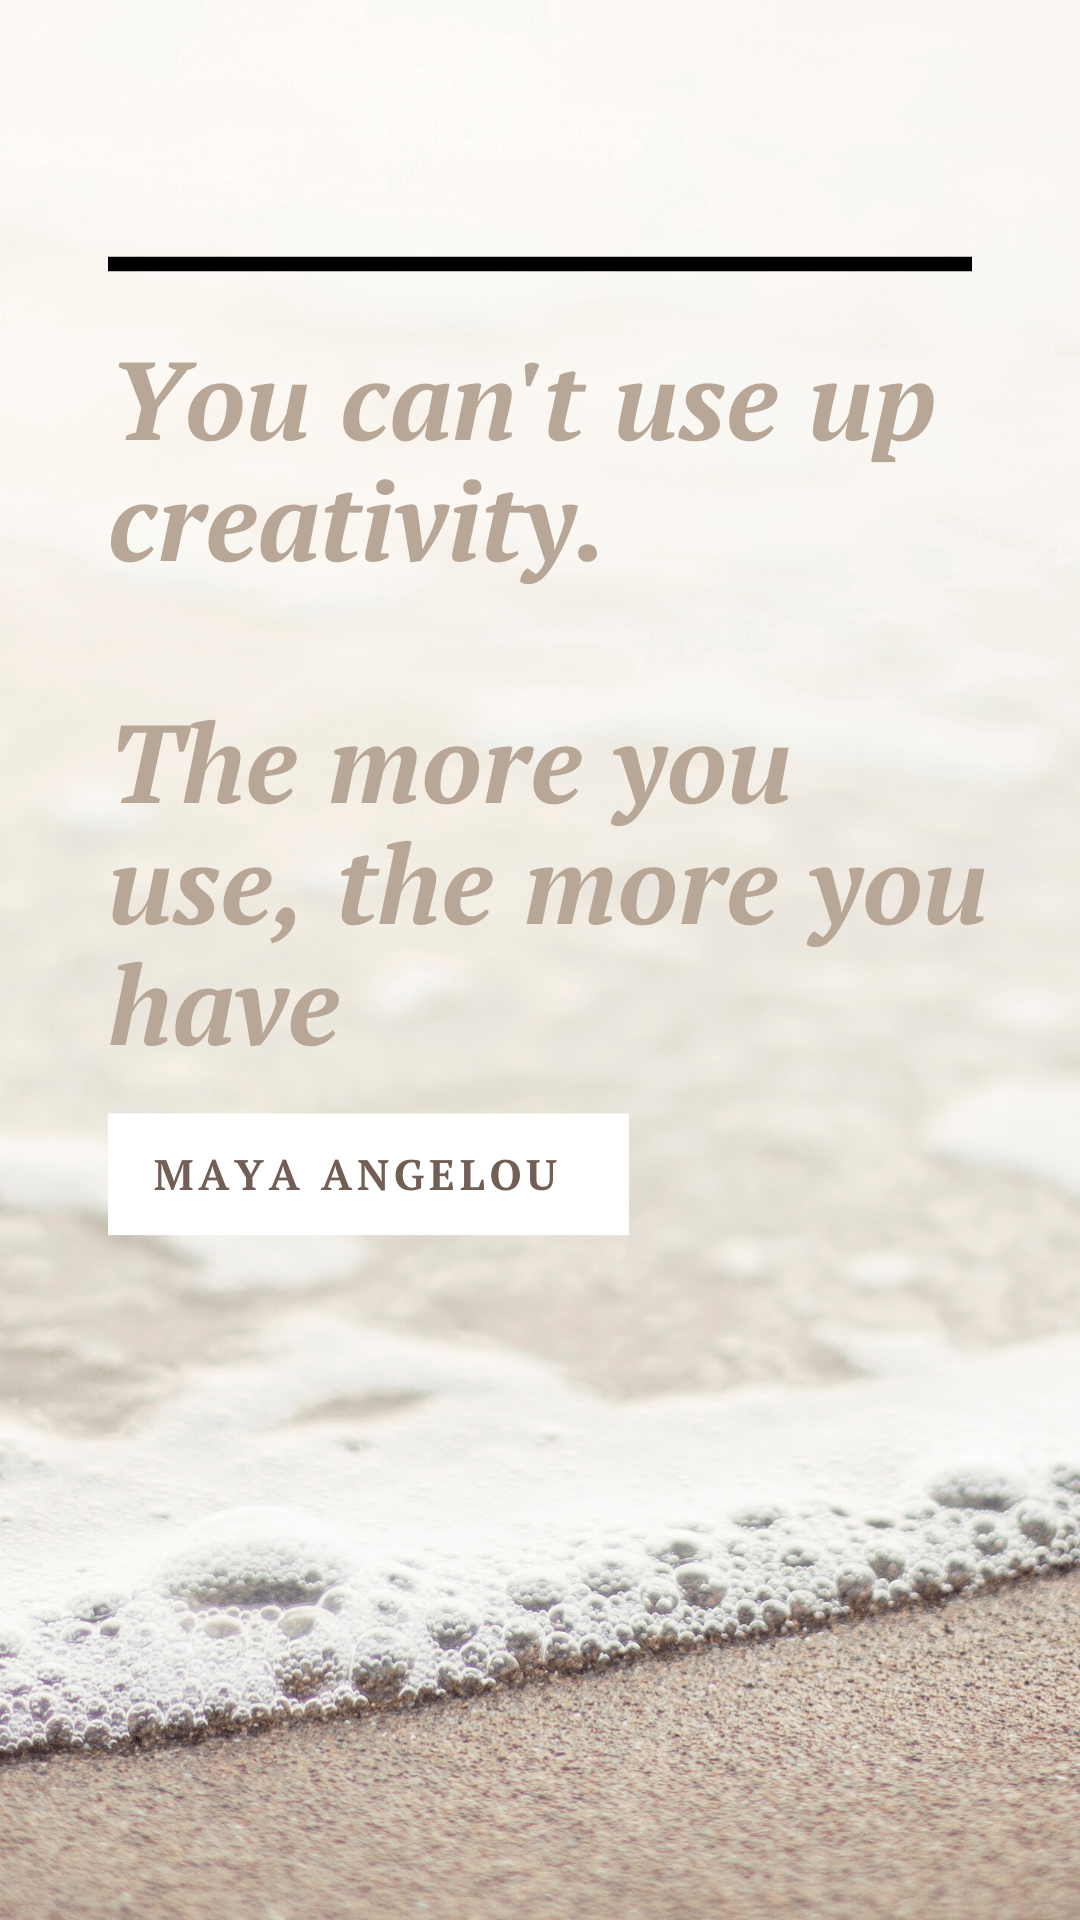 Pinterest quote for creativity